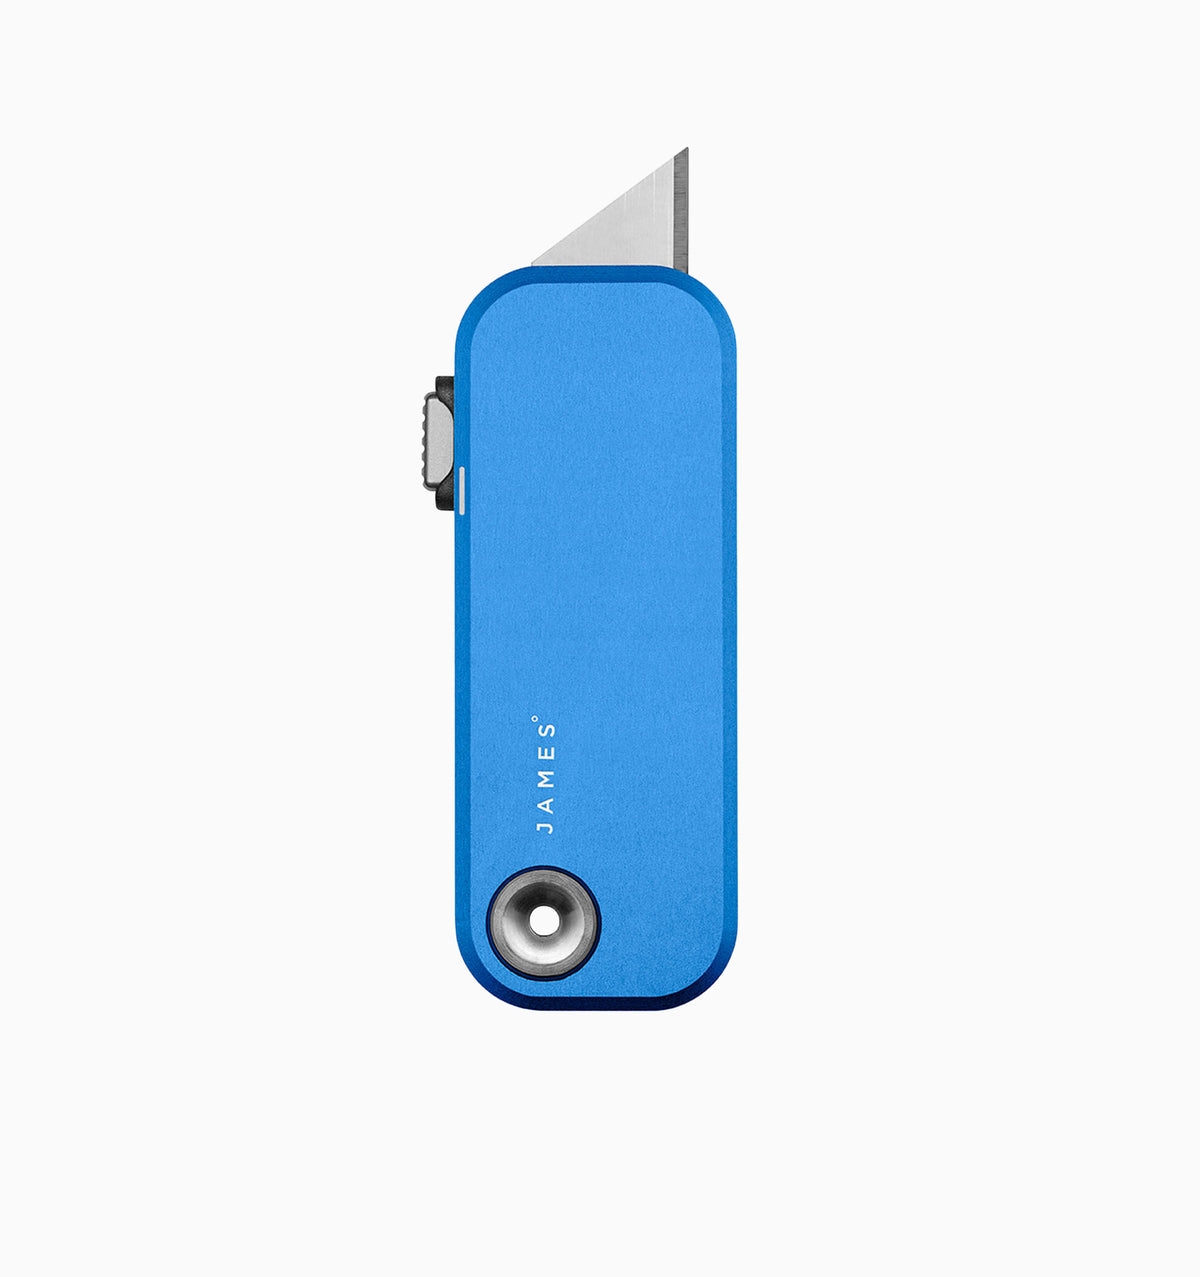 The James Brand - The Palmer Utility Knife - Cerulean + Yellow